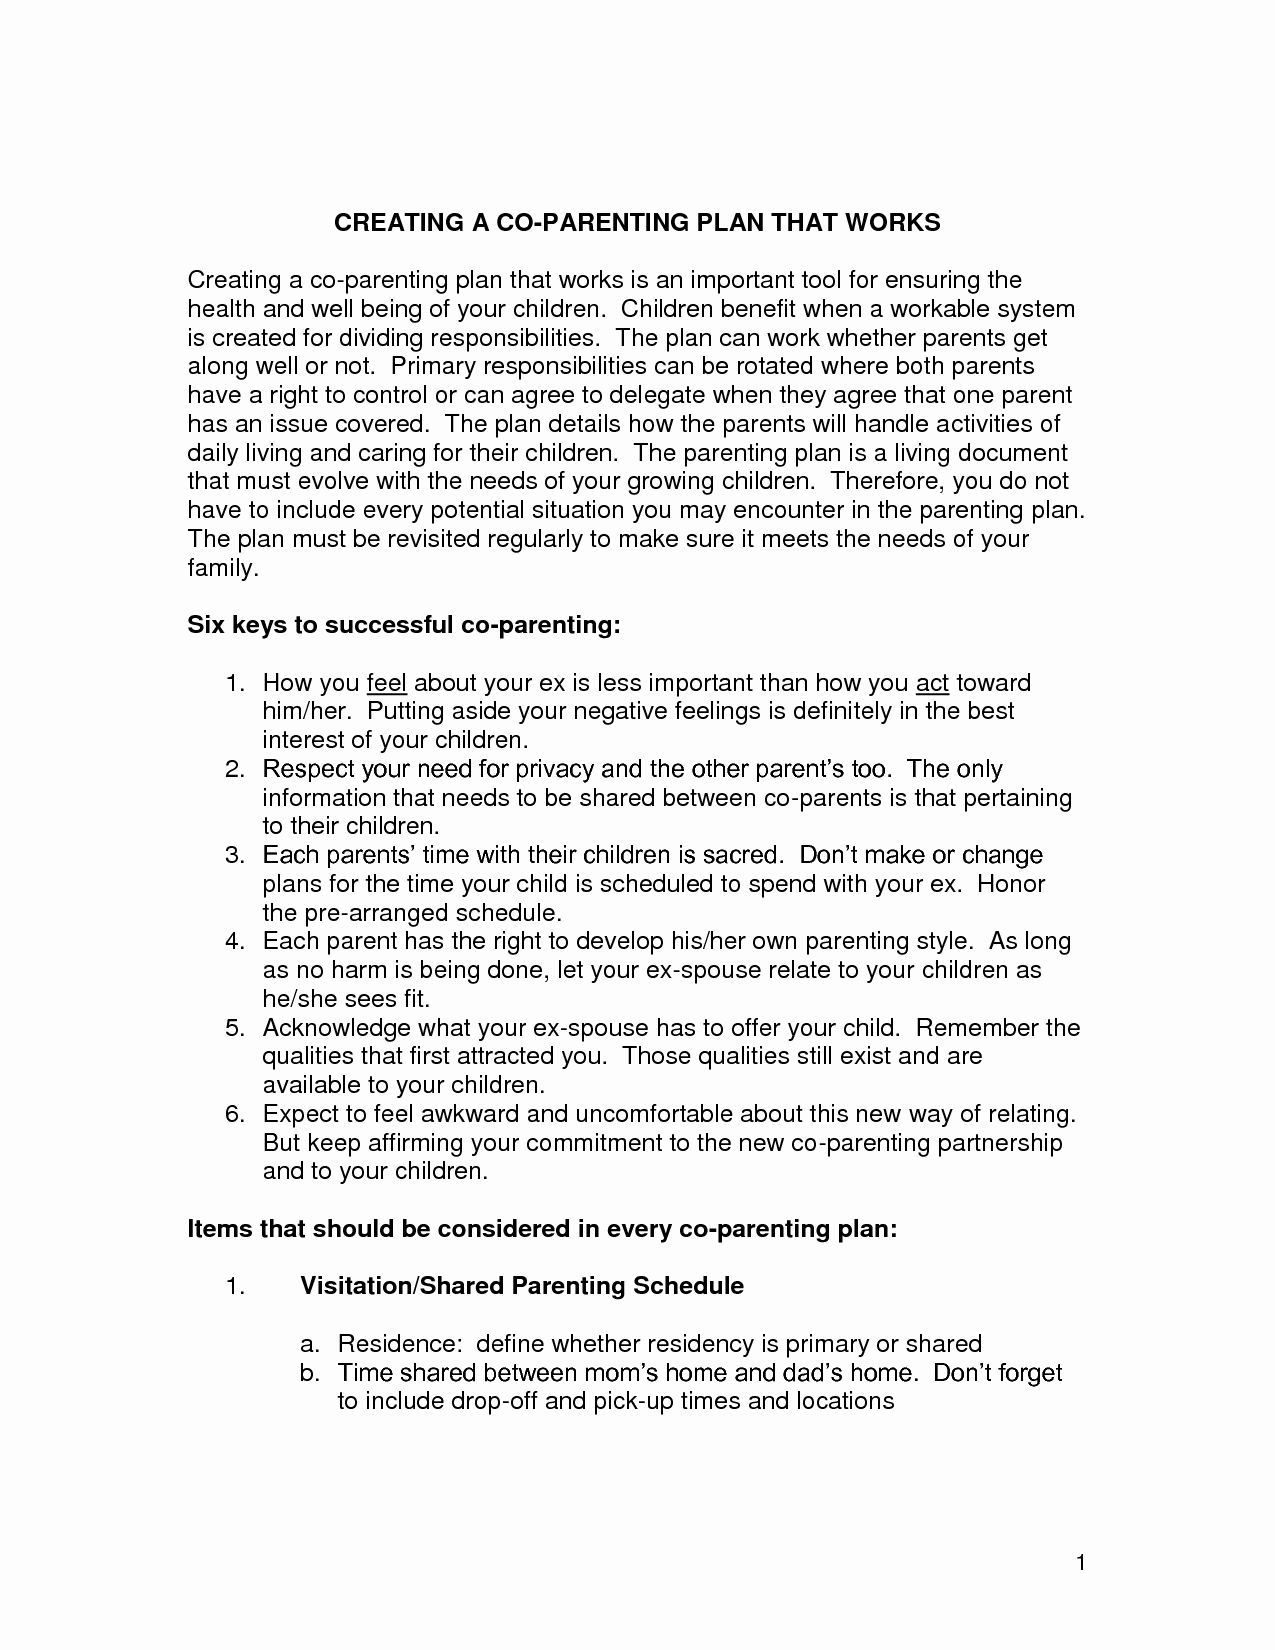 Long Distance Parenting Plan Template Elegant Gallery Of Parenting Plan Worksheets for Coparents Co